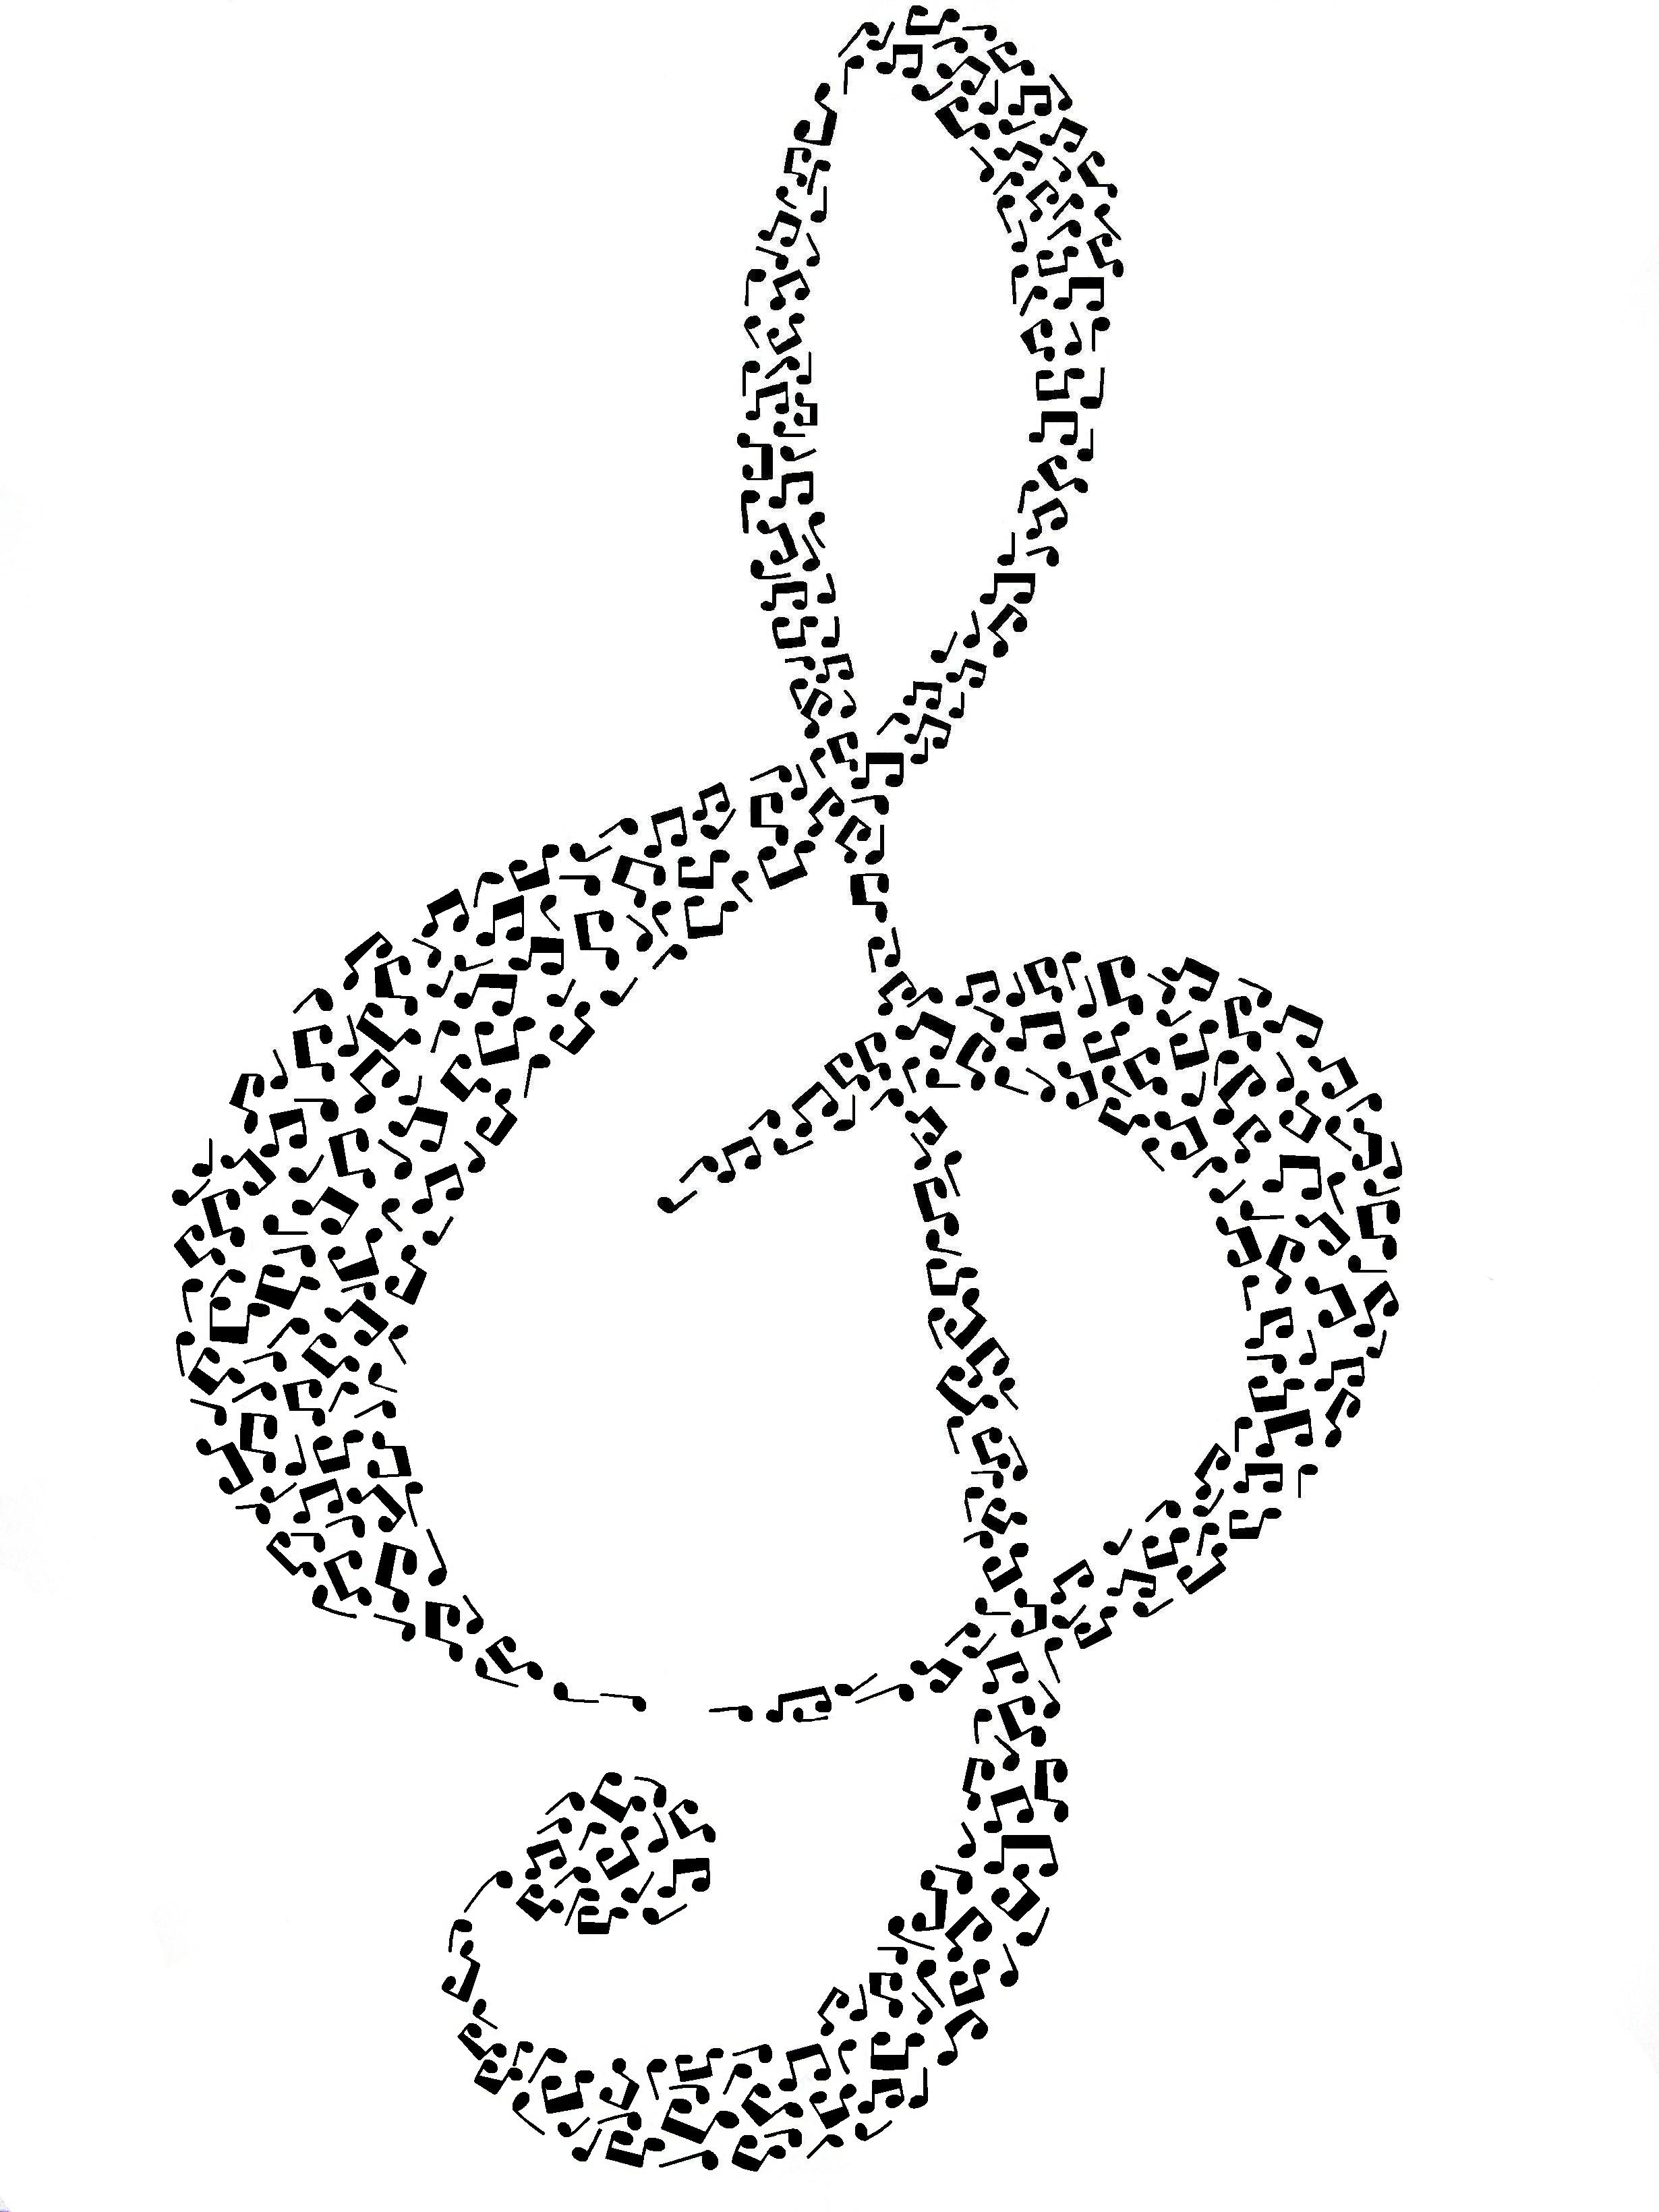 A Music Note Group With Items